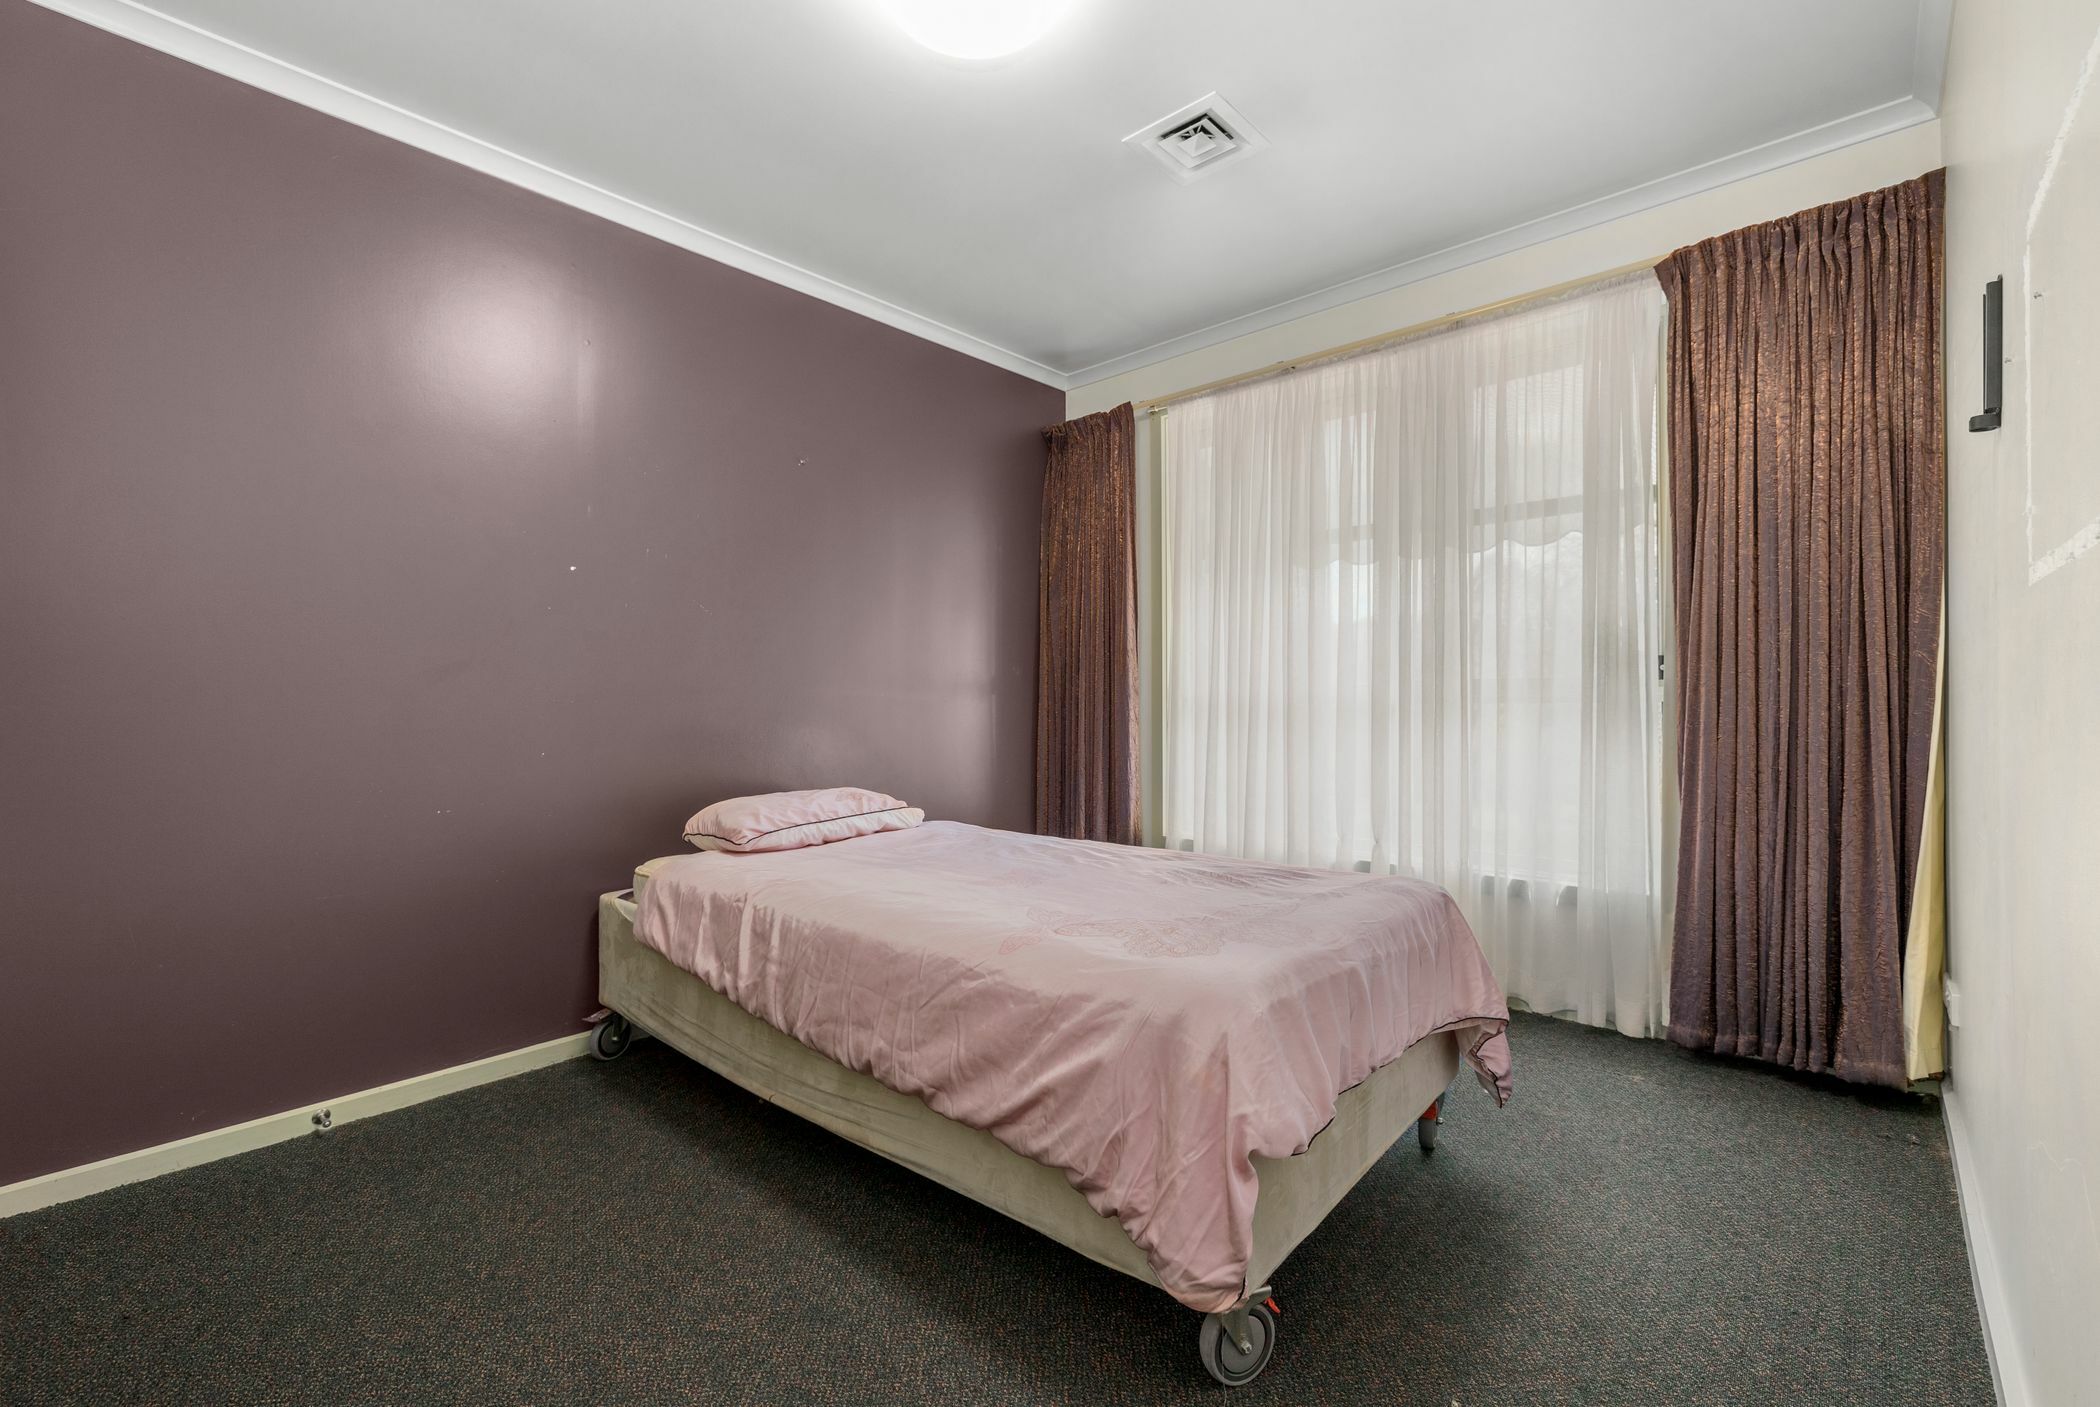 Bedroom with violet walls and drapes